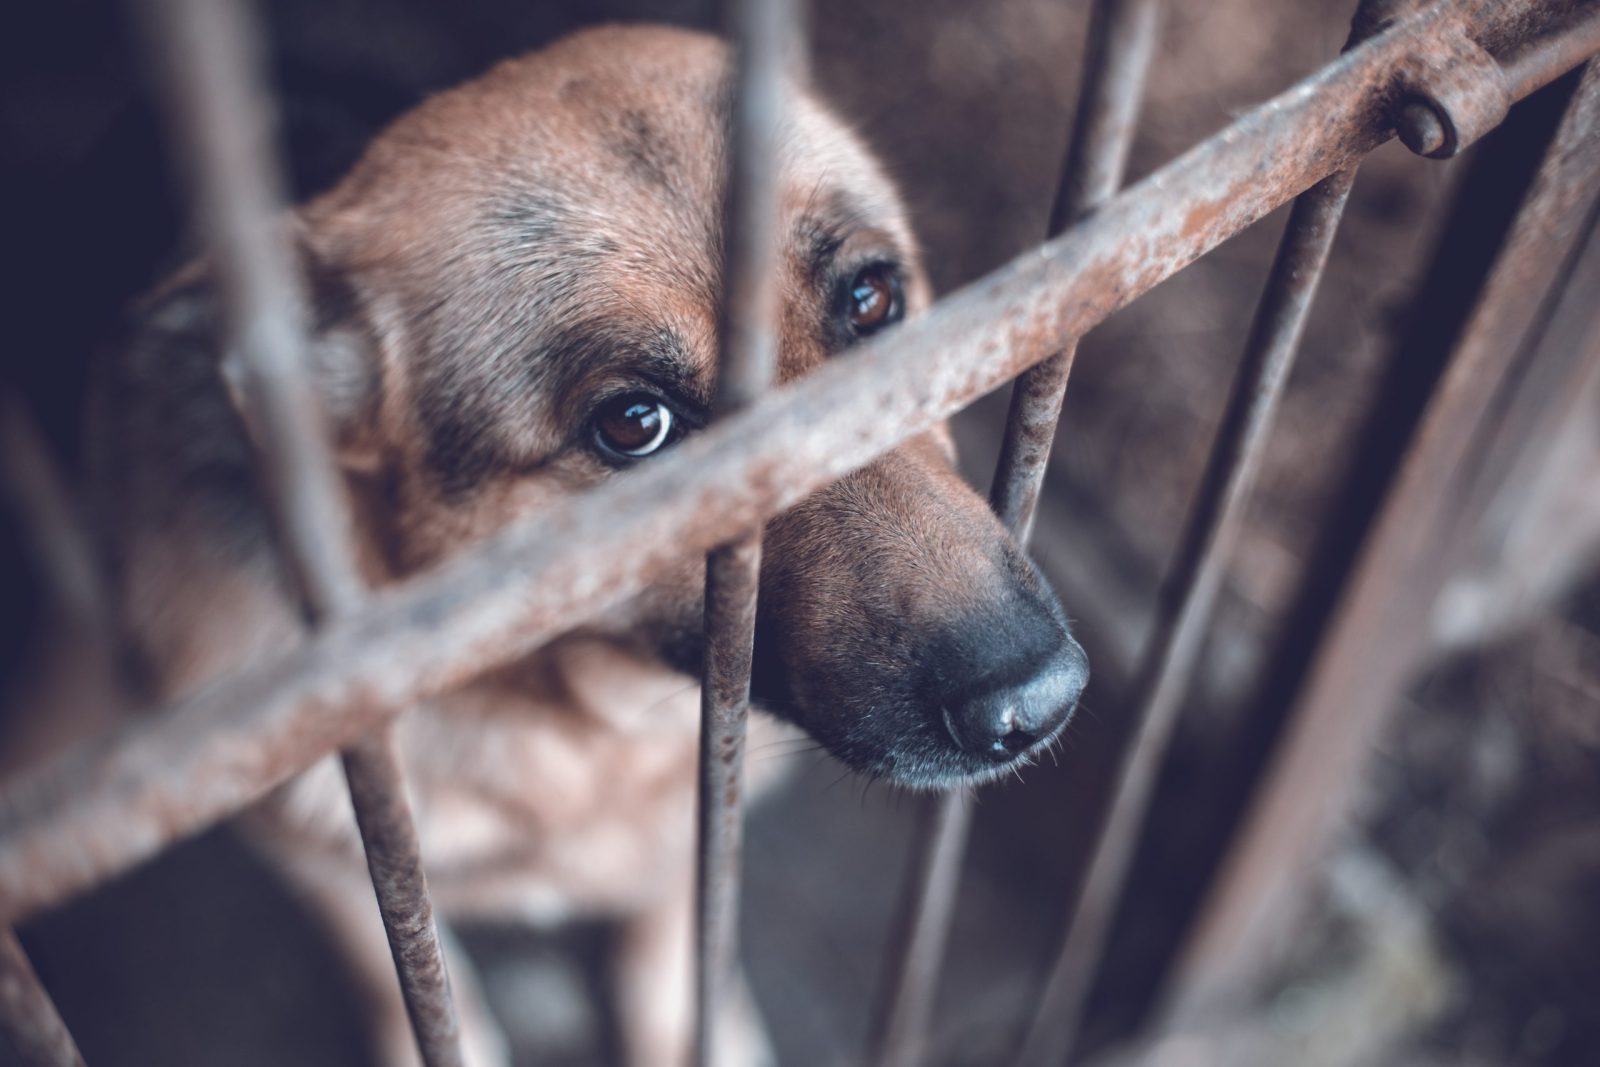 shutterstock_783074461-scaled-e1670374981274.jpgfit16002C1067ssl1 Petition: Tell Australia to Invest in Effective Animal Cruelty Prevention Laws